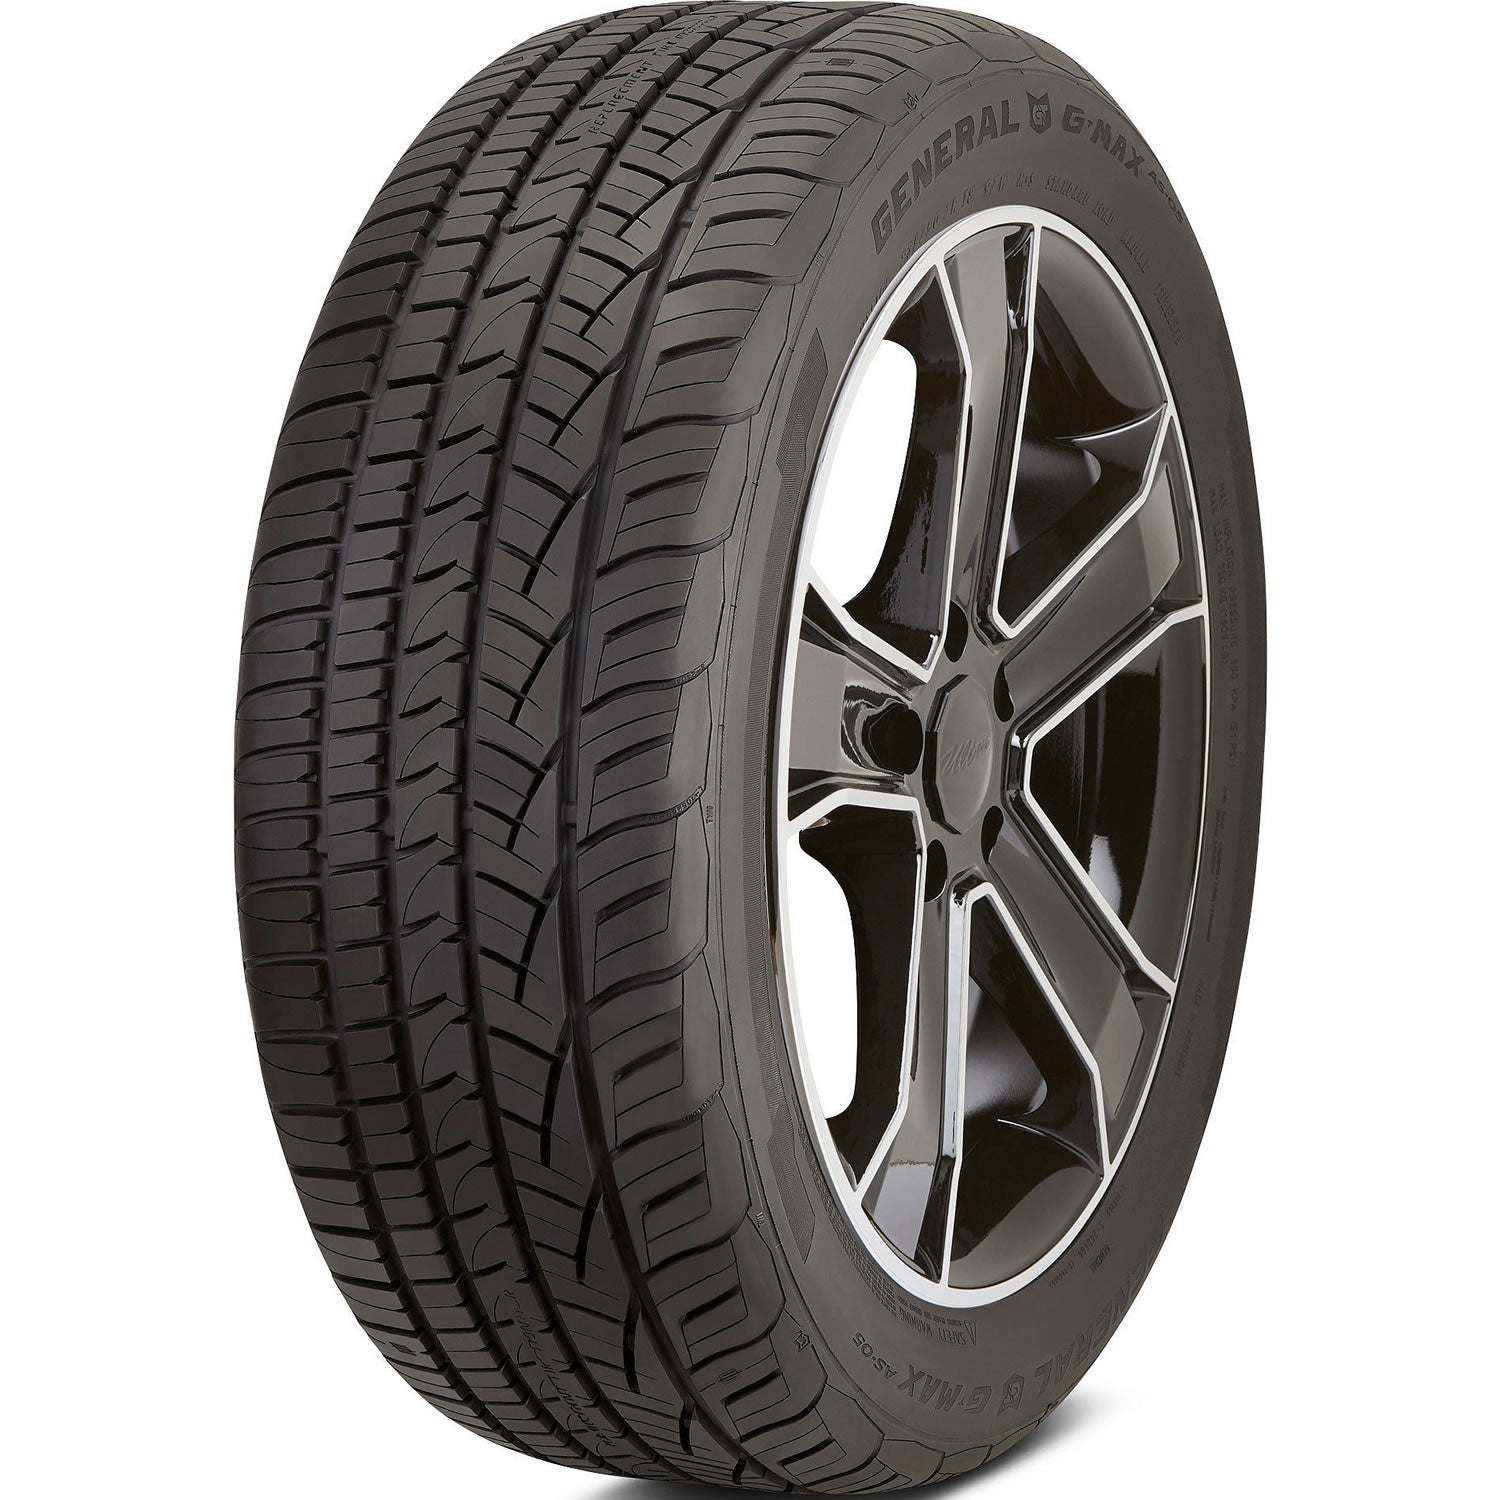 GENERAL G-MAX AS-05 245/45ZR17 (25.7X9.7R 17) Tires